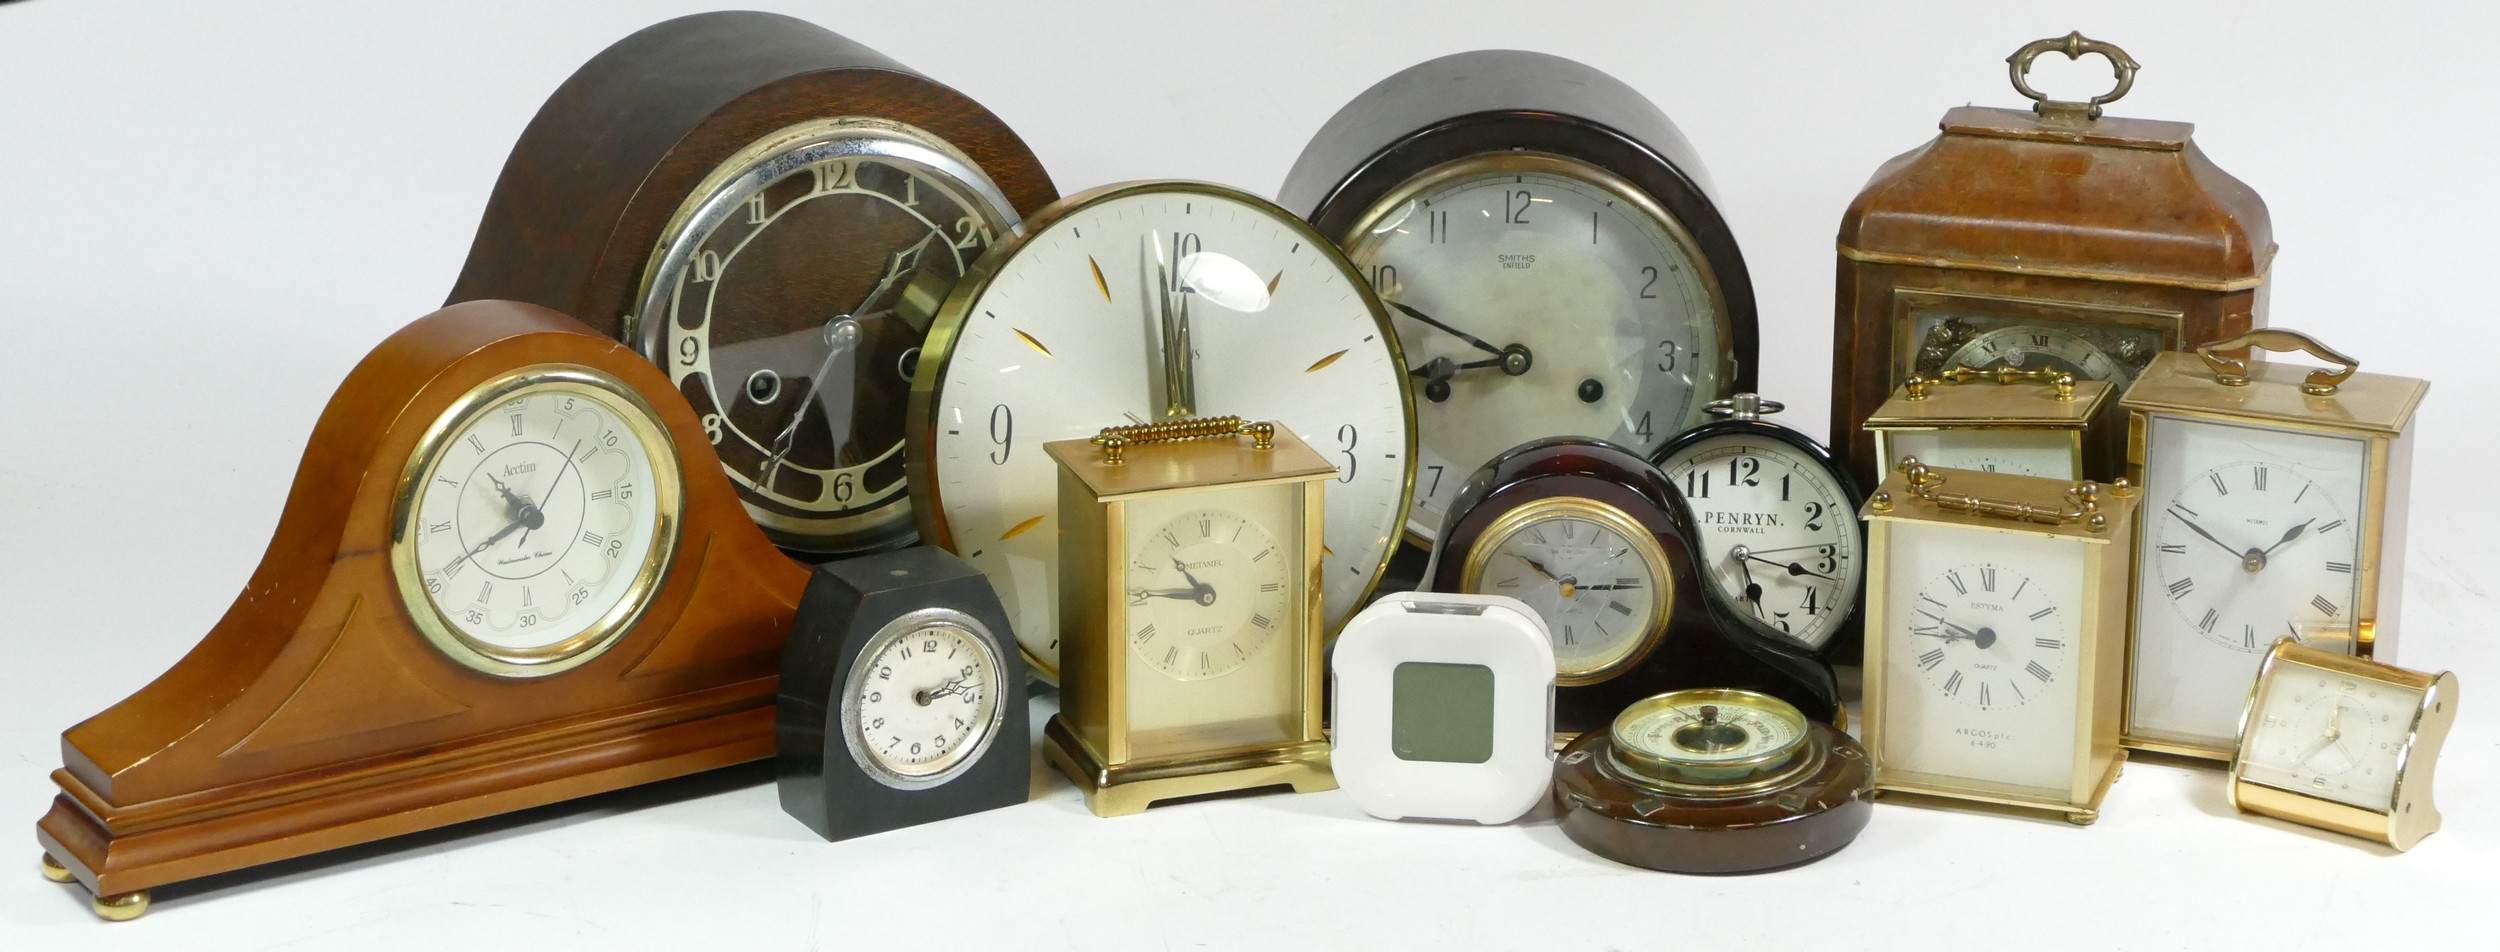 A collection of mid 20th century and later mantel clocks, carriage clocks, alarm clocks and - Image 3 of 4